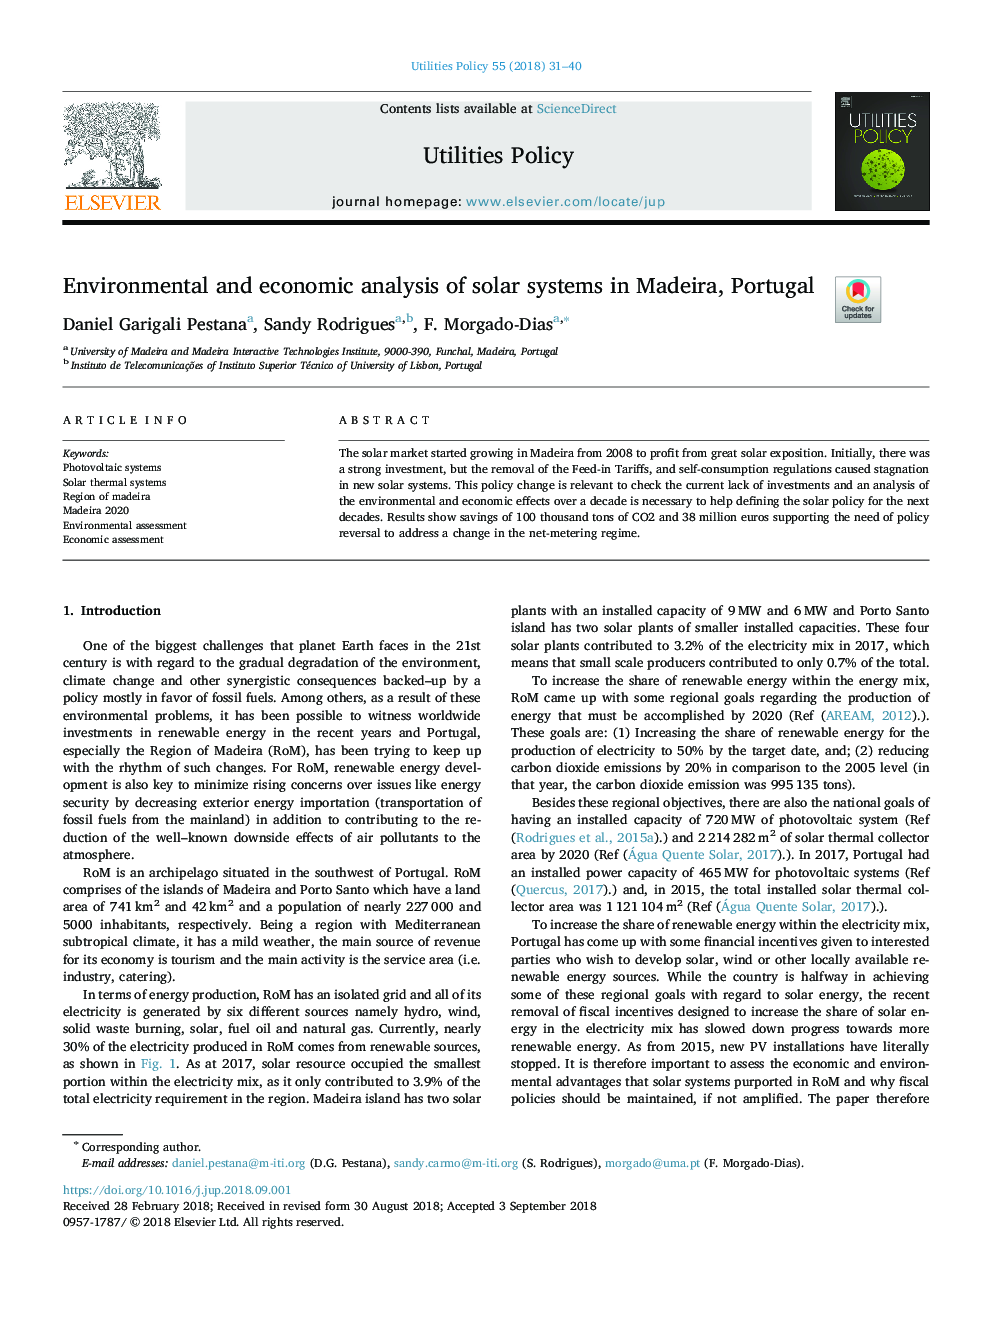 Environmental and economic analysis of solar systems in Madeira, Portugal